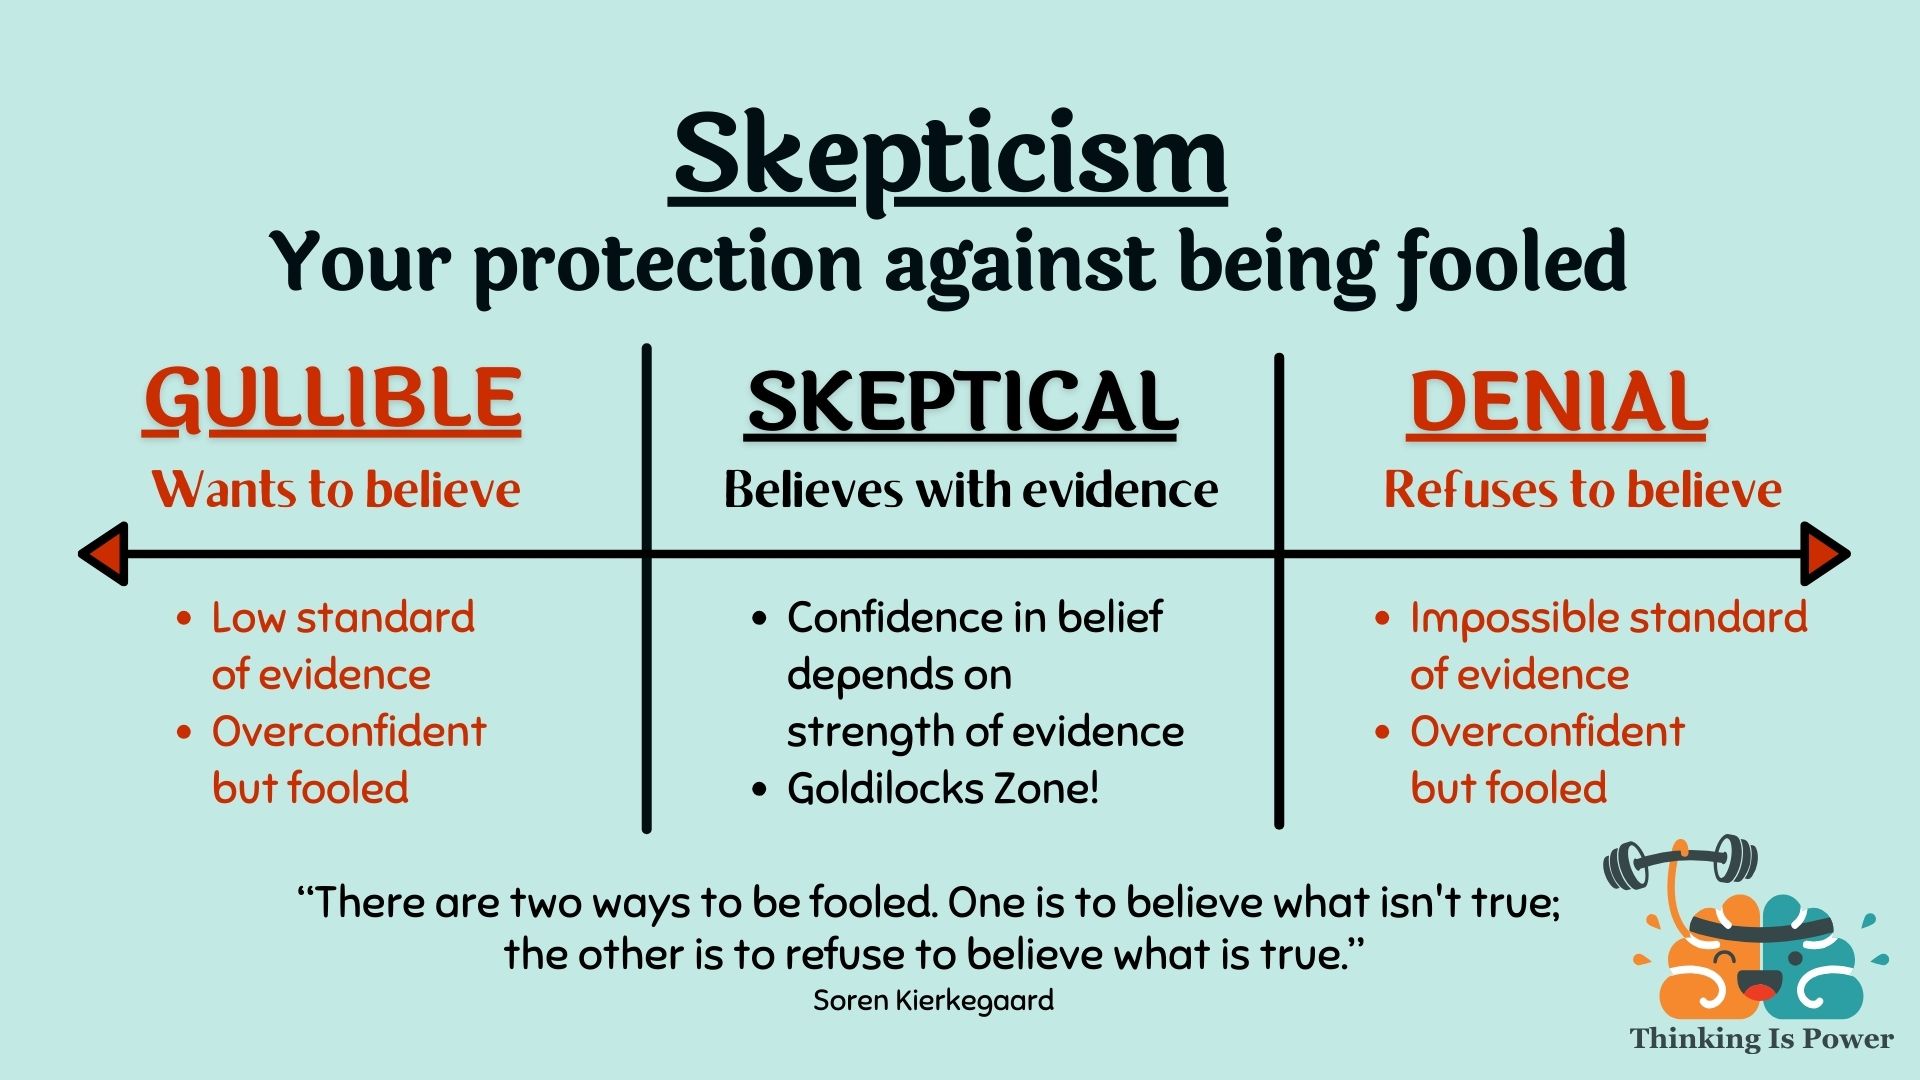 Skepticism: A tool to not get fooled. Gullible wants to believe and has a low standard of evidence. Denial refuses to believe and has an impossible standard of evidence. Skeptical believes with evidence.